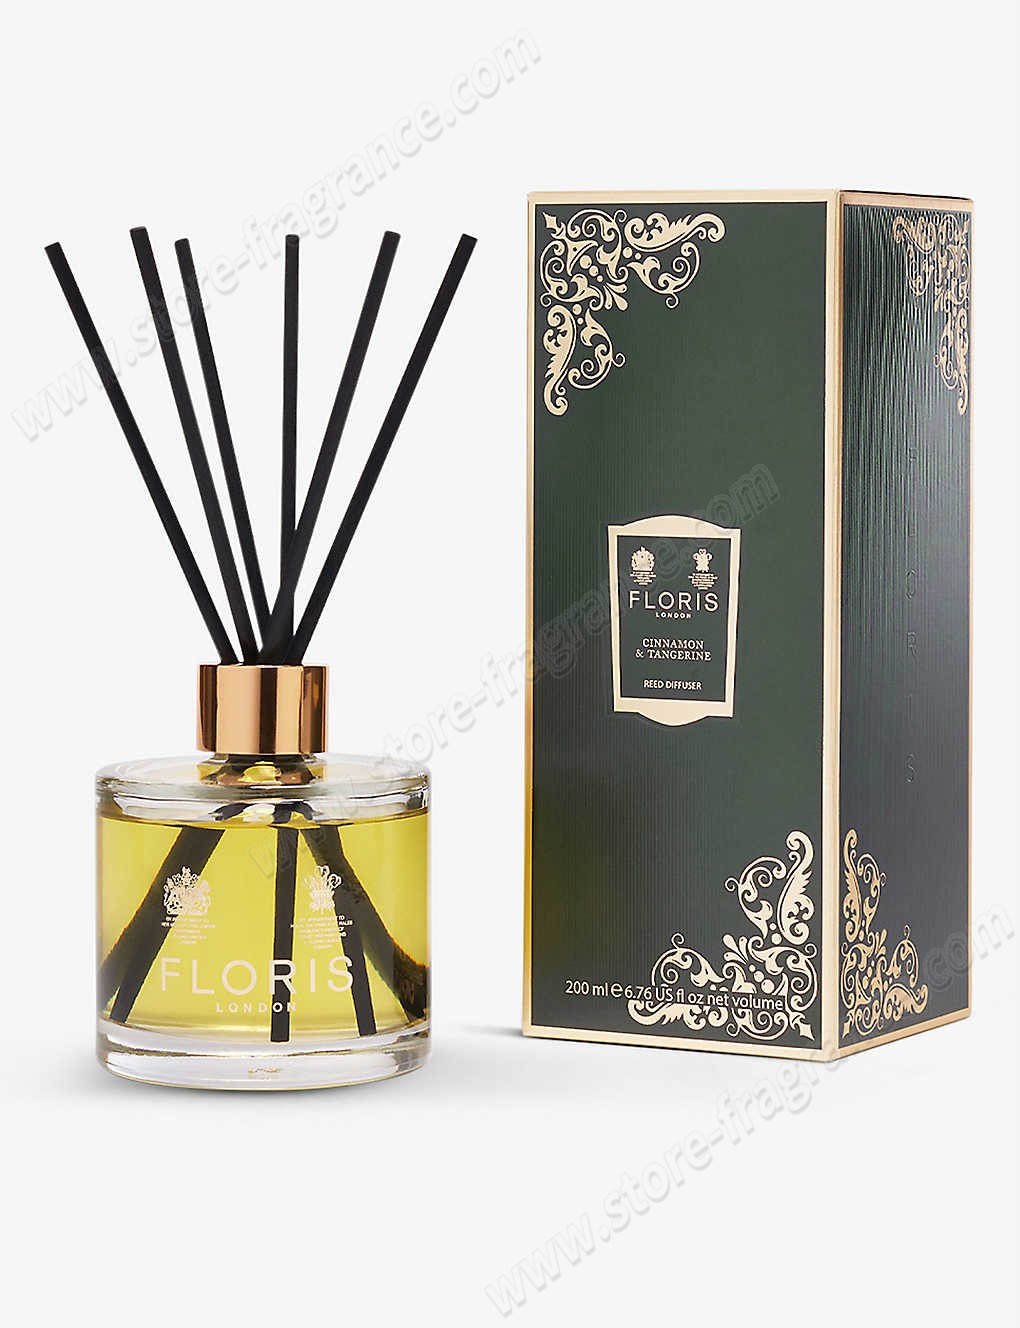 FLORIS/Cinnamon and Tangerine reed diffuser 200ml Limit Offer - -0